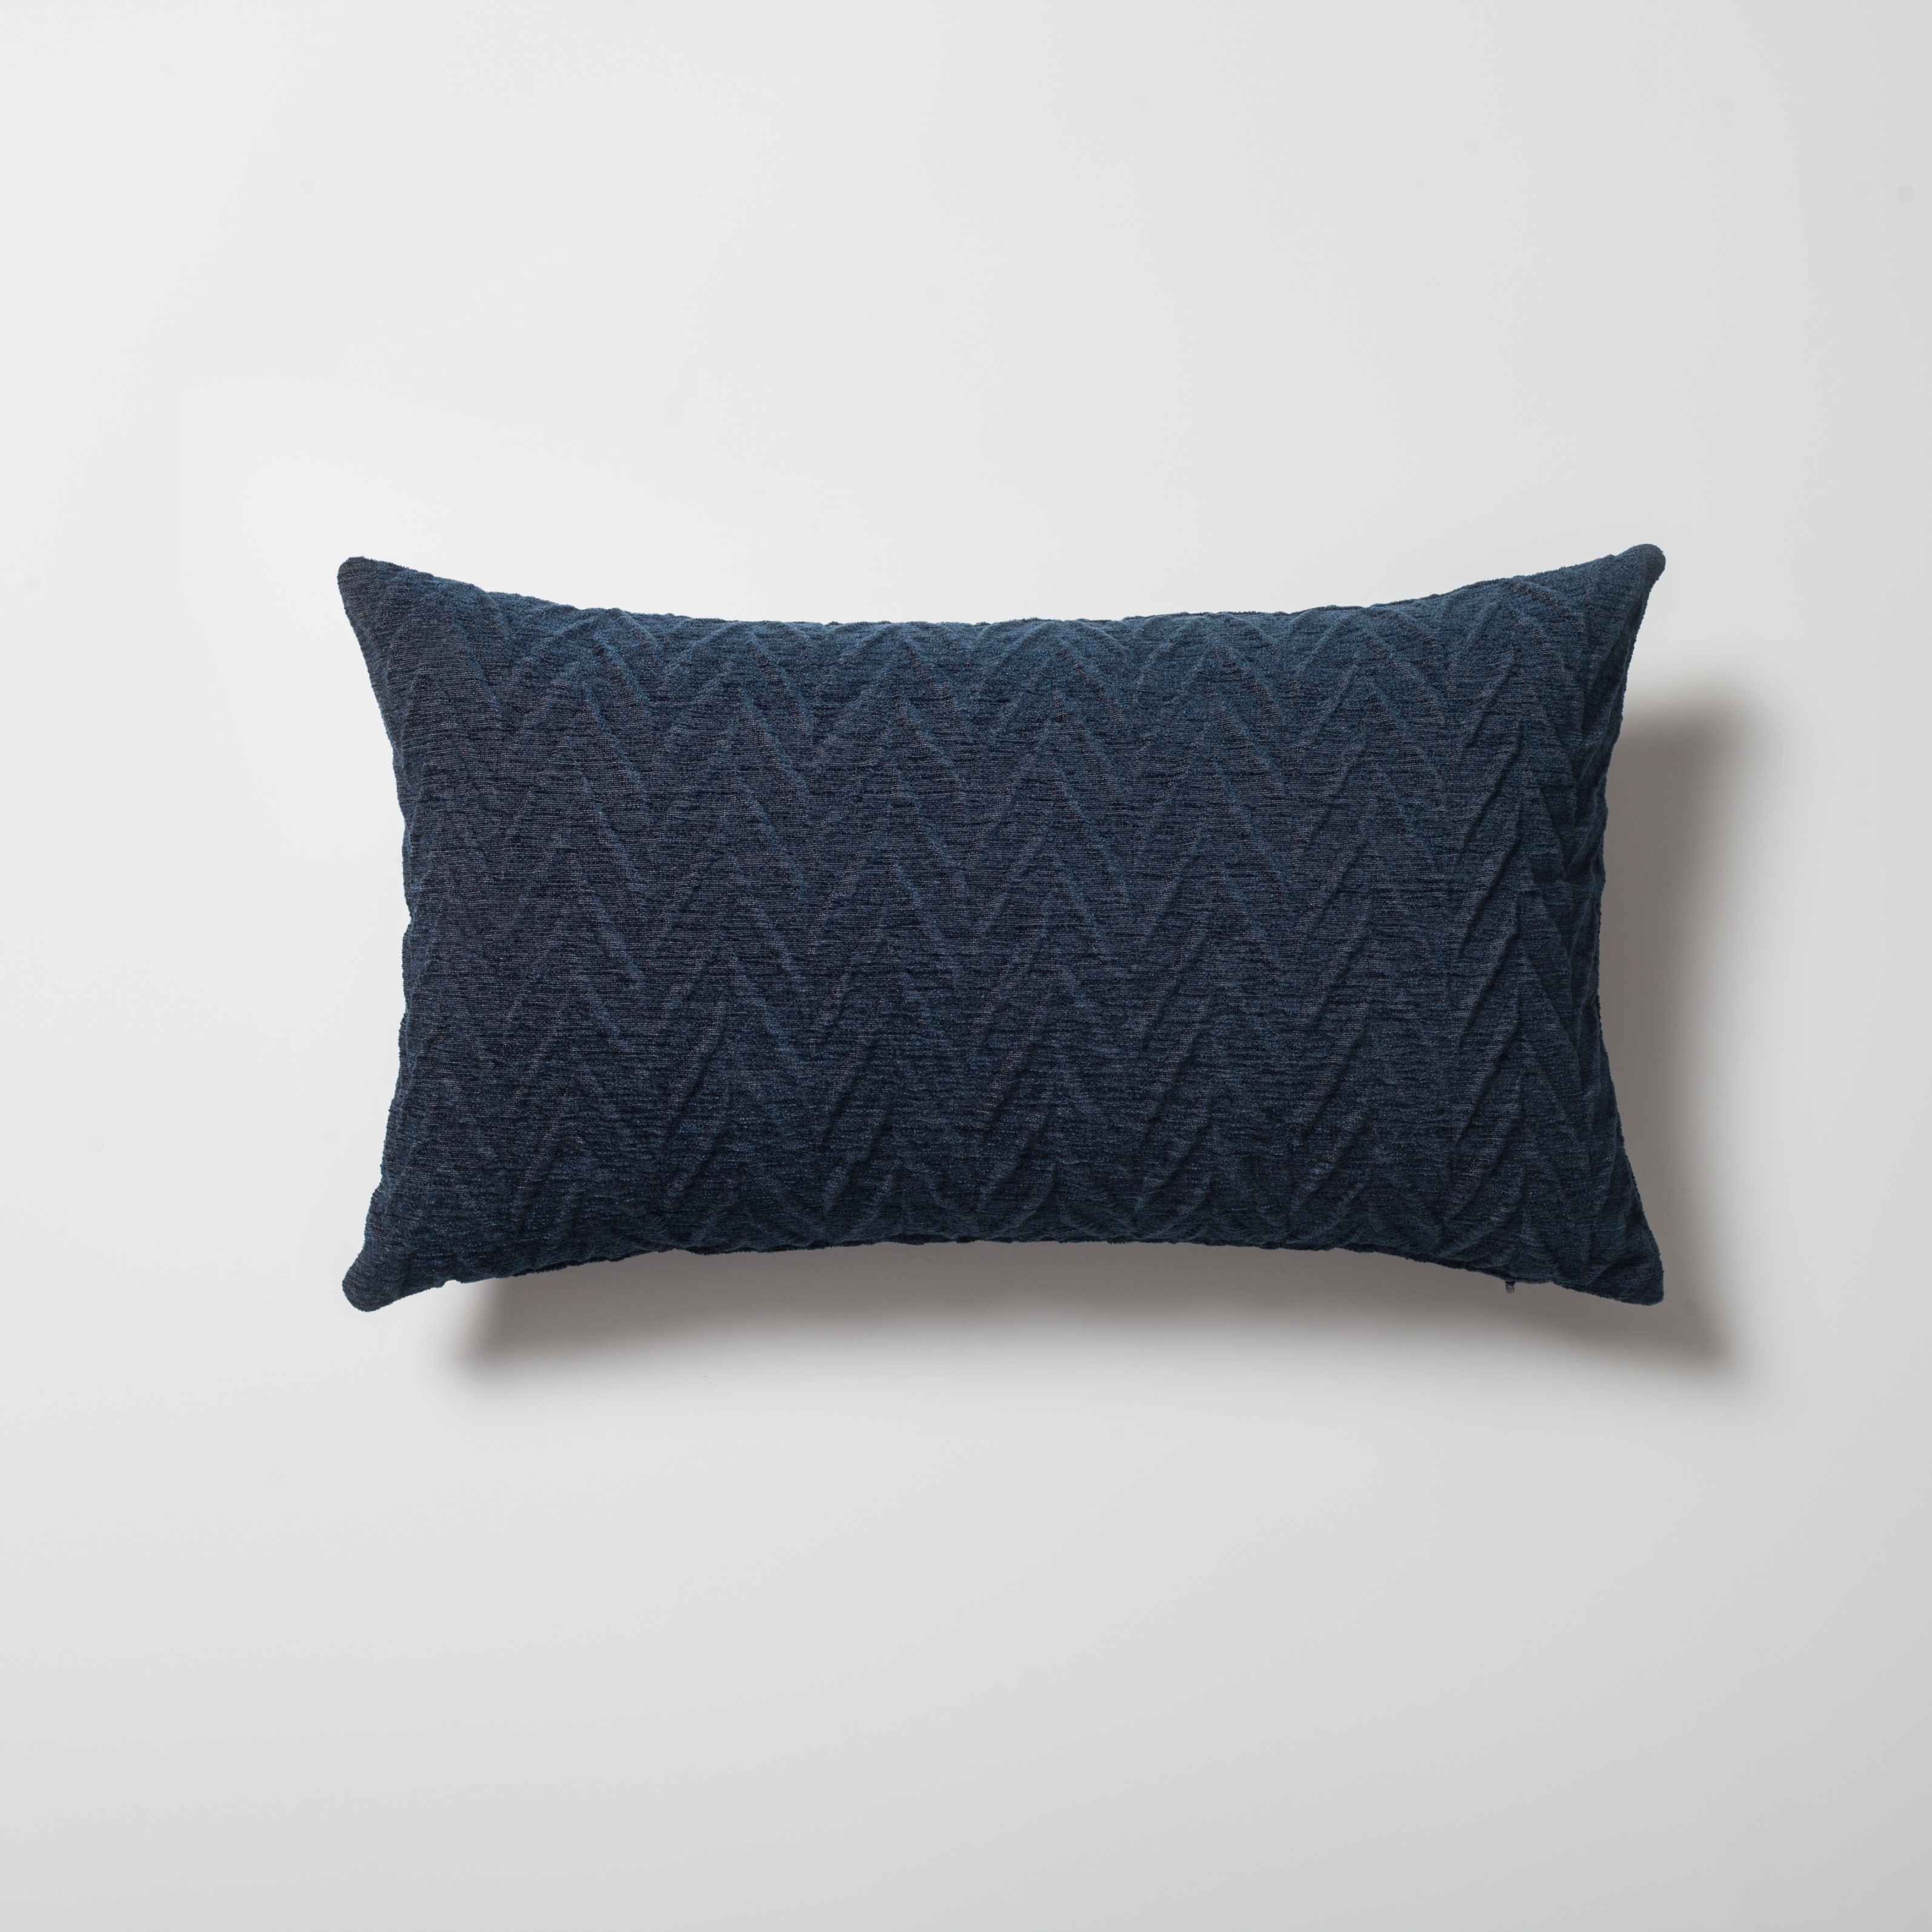 "Cello" - Embossed Pattern Cushion 12x20 Inch - Navy Blue (Cover Only)